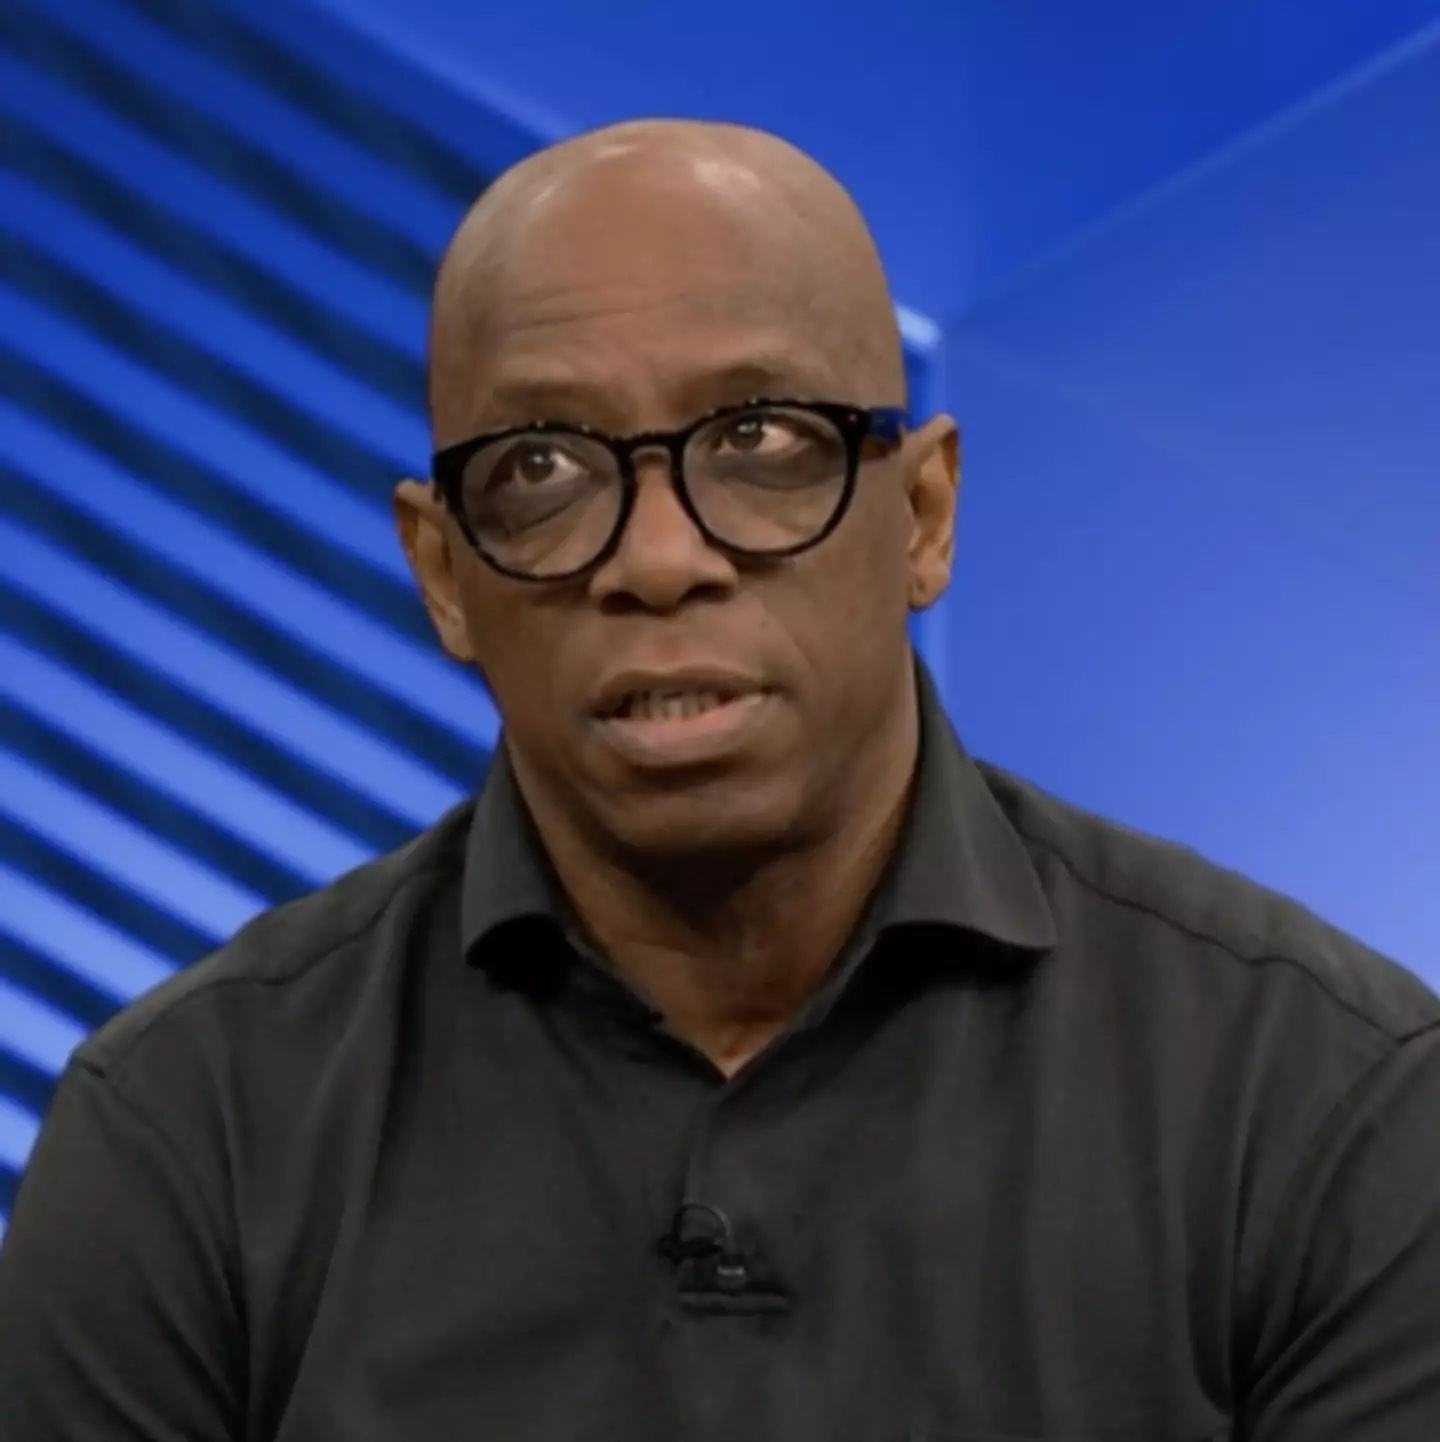 Ian Wright vowed to leave the BBC if Lineker was sacked.